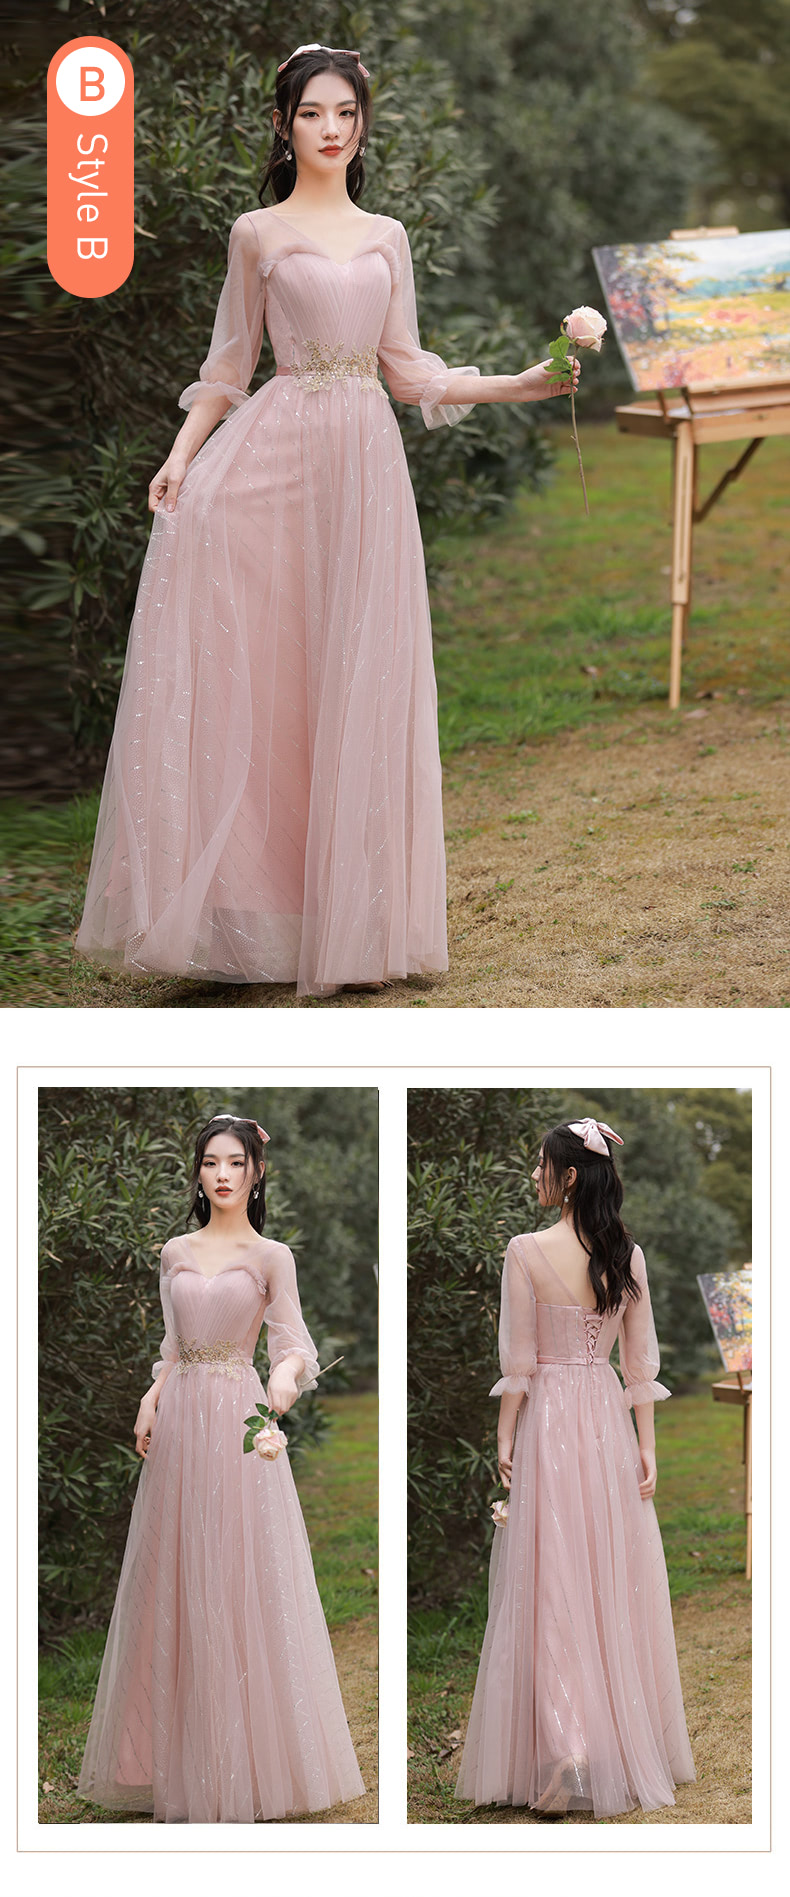 Fairy-Pink-Bridesmaid-Dress-with-Sleeves-Chiffon-Long-Casual-Gown20.jpg